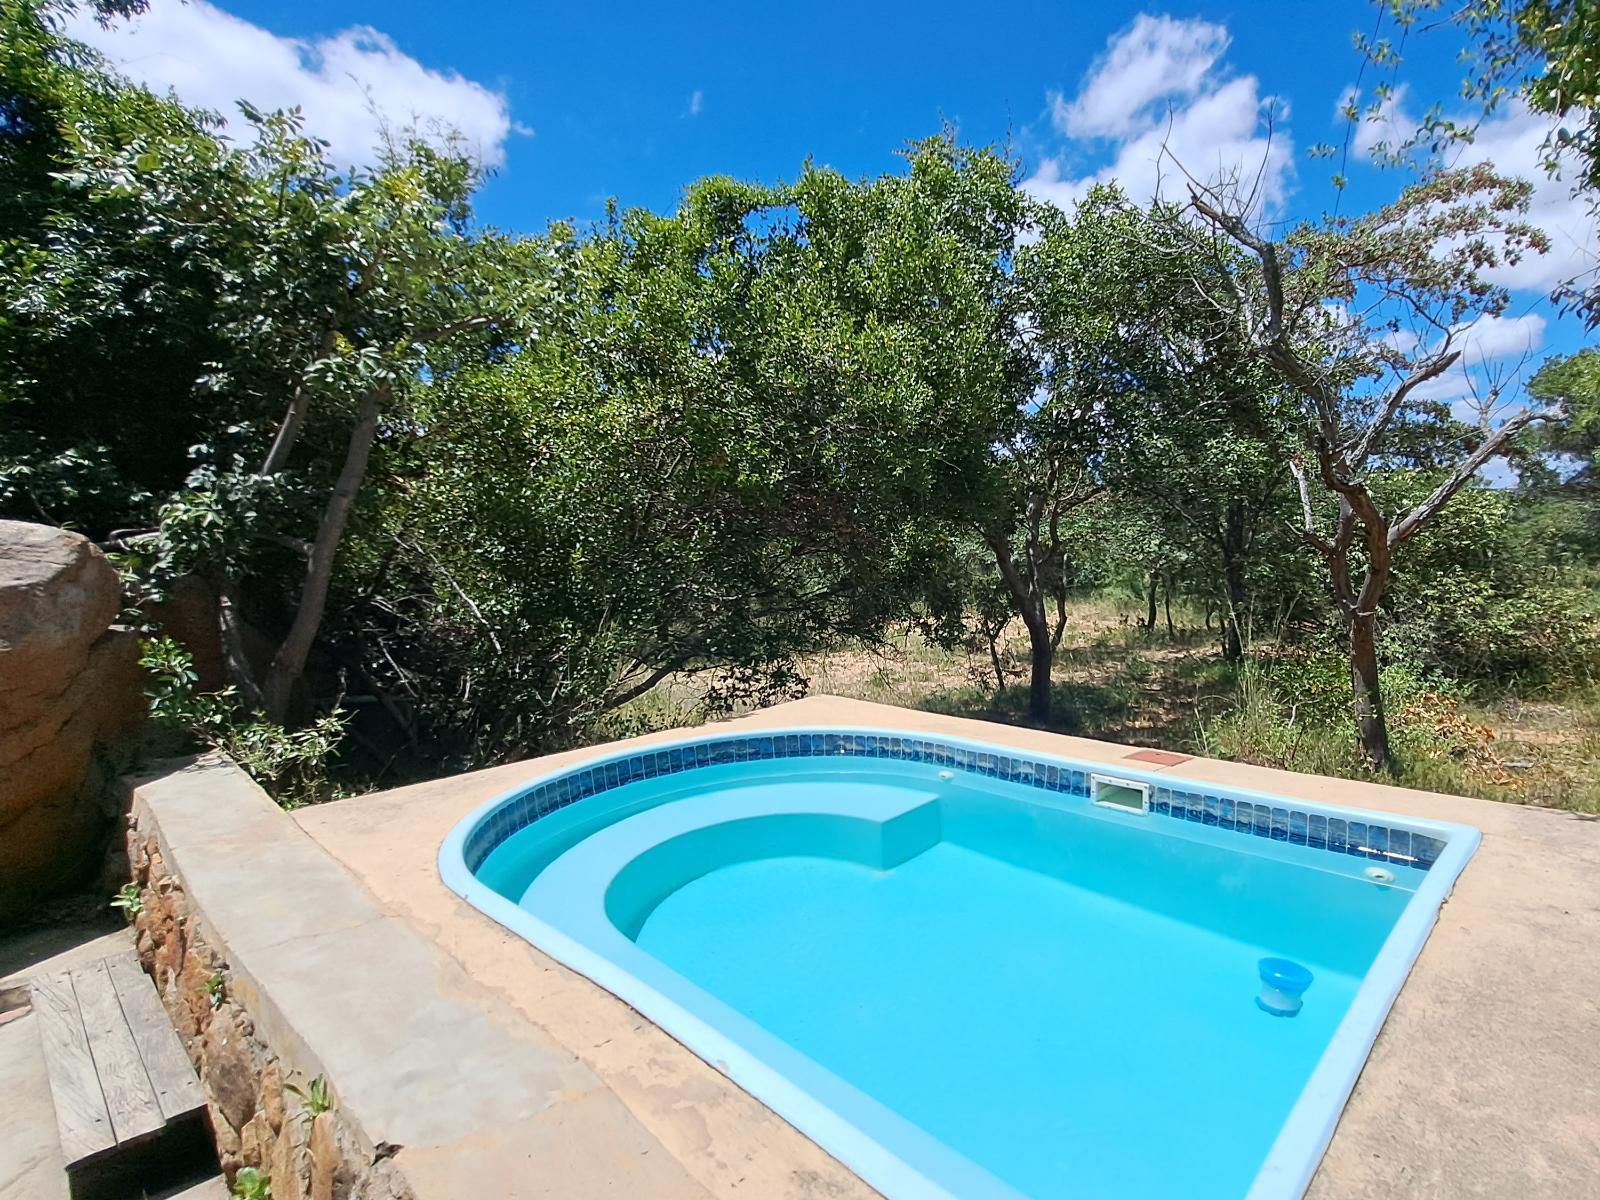 Izintaba Private Game Reserve Vaalwater Limpopo Province South Africa Garden, Nature, Plant, Swimming Pool